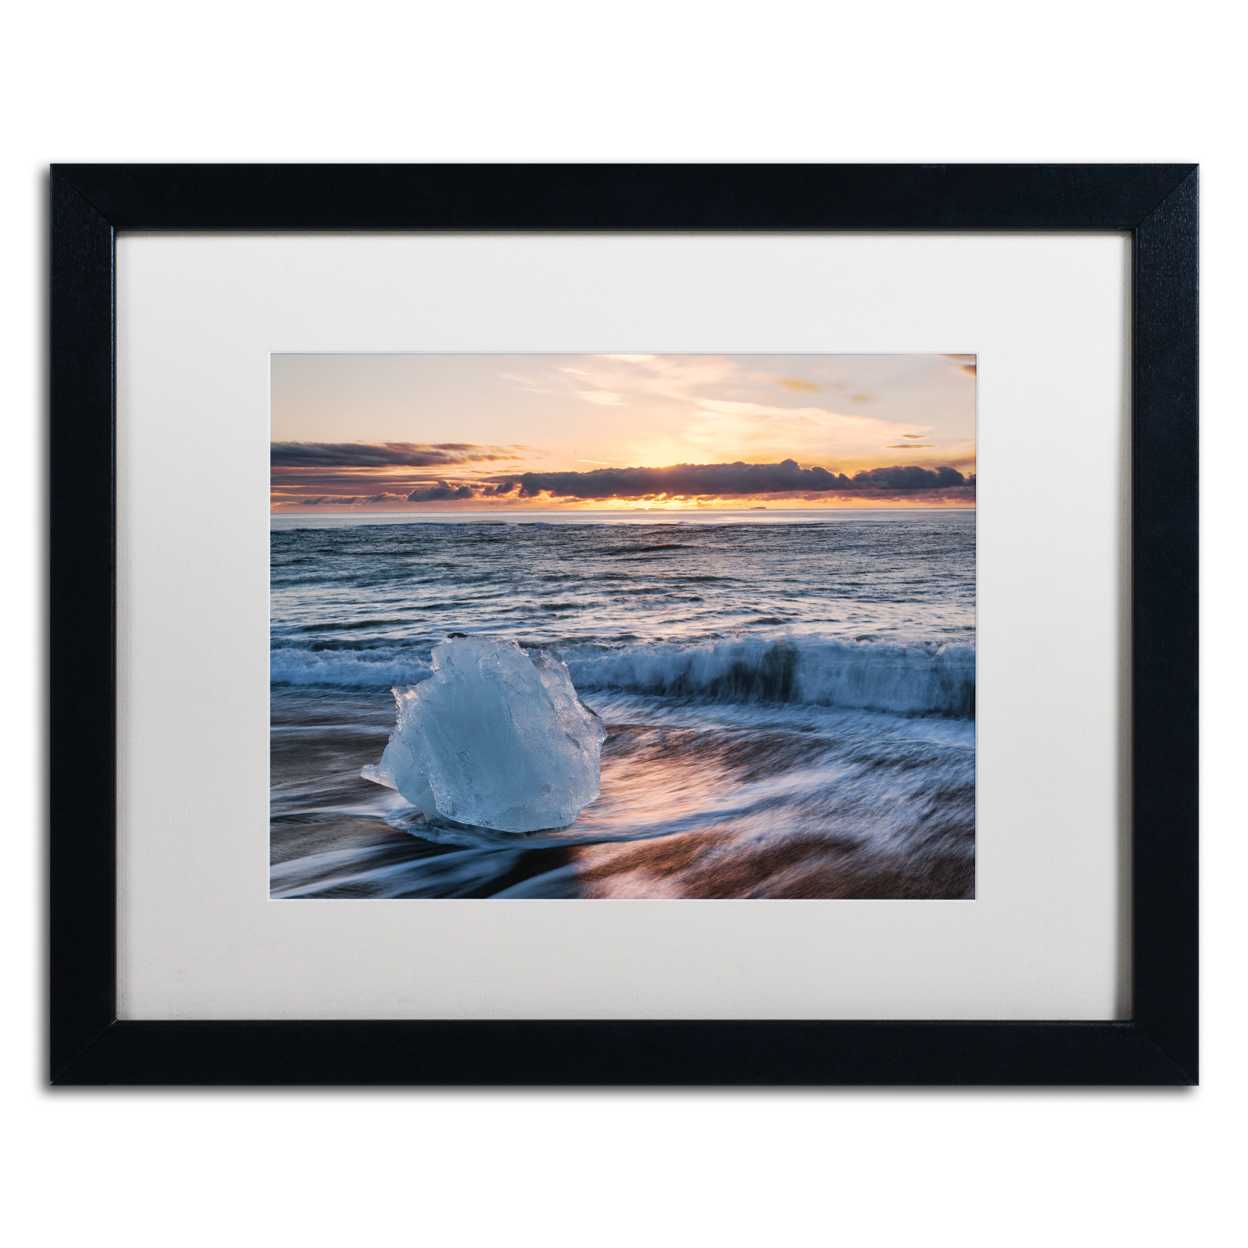 Michael Blanchette Photography 'Crystal Floret' Black Wooden Framed Art 18 X 22 Inches